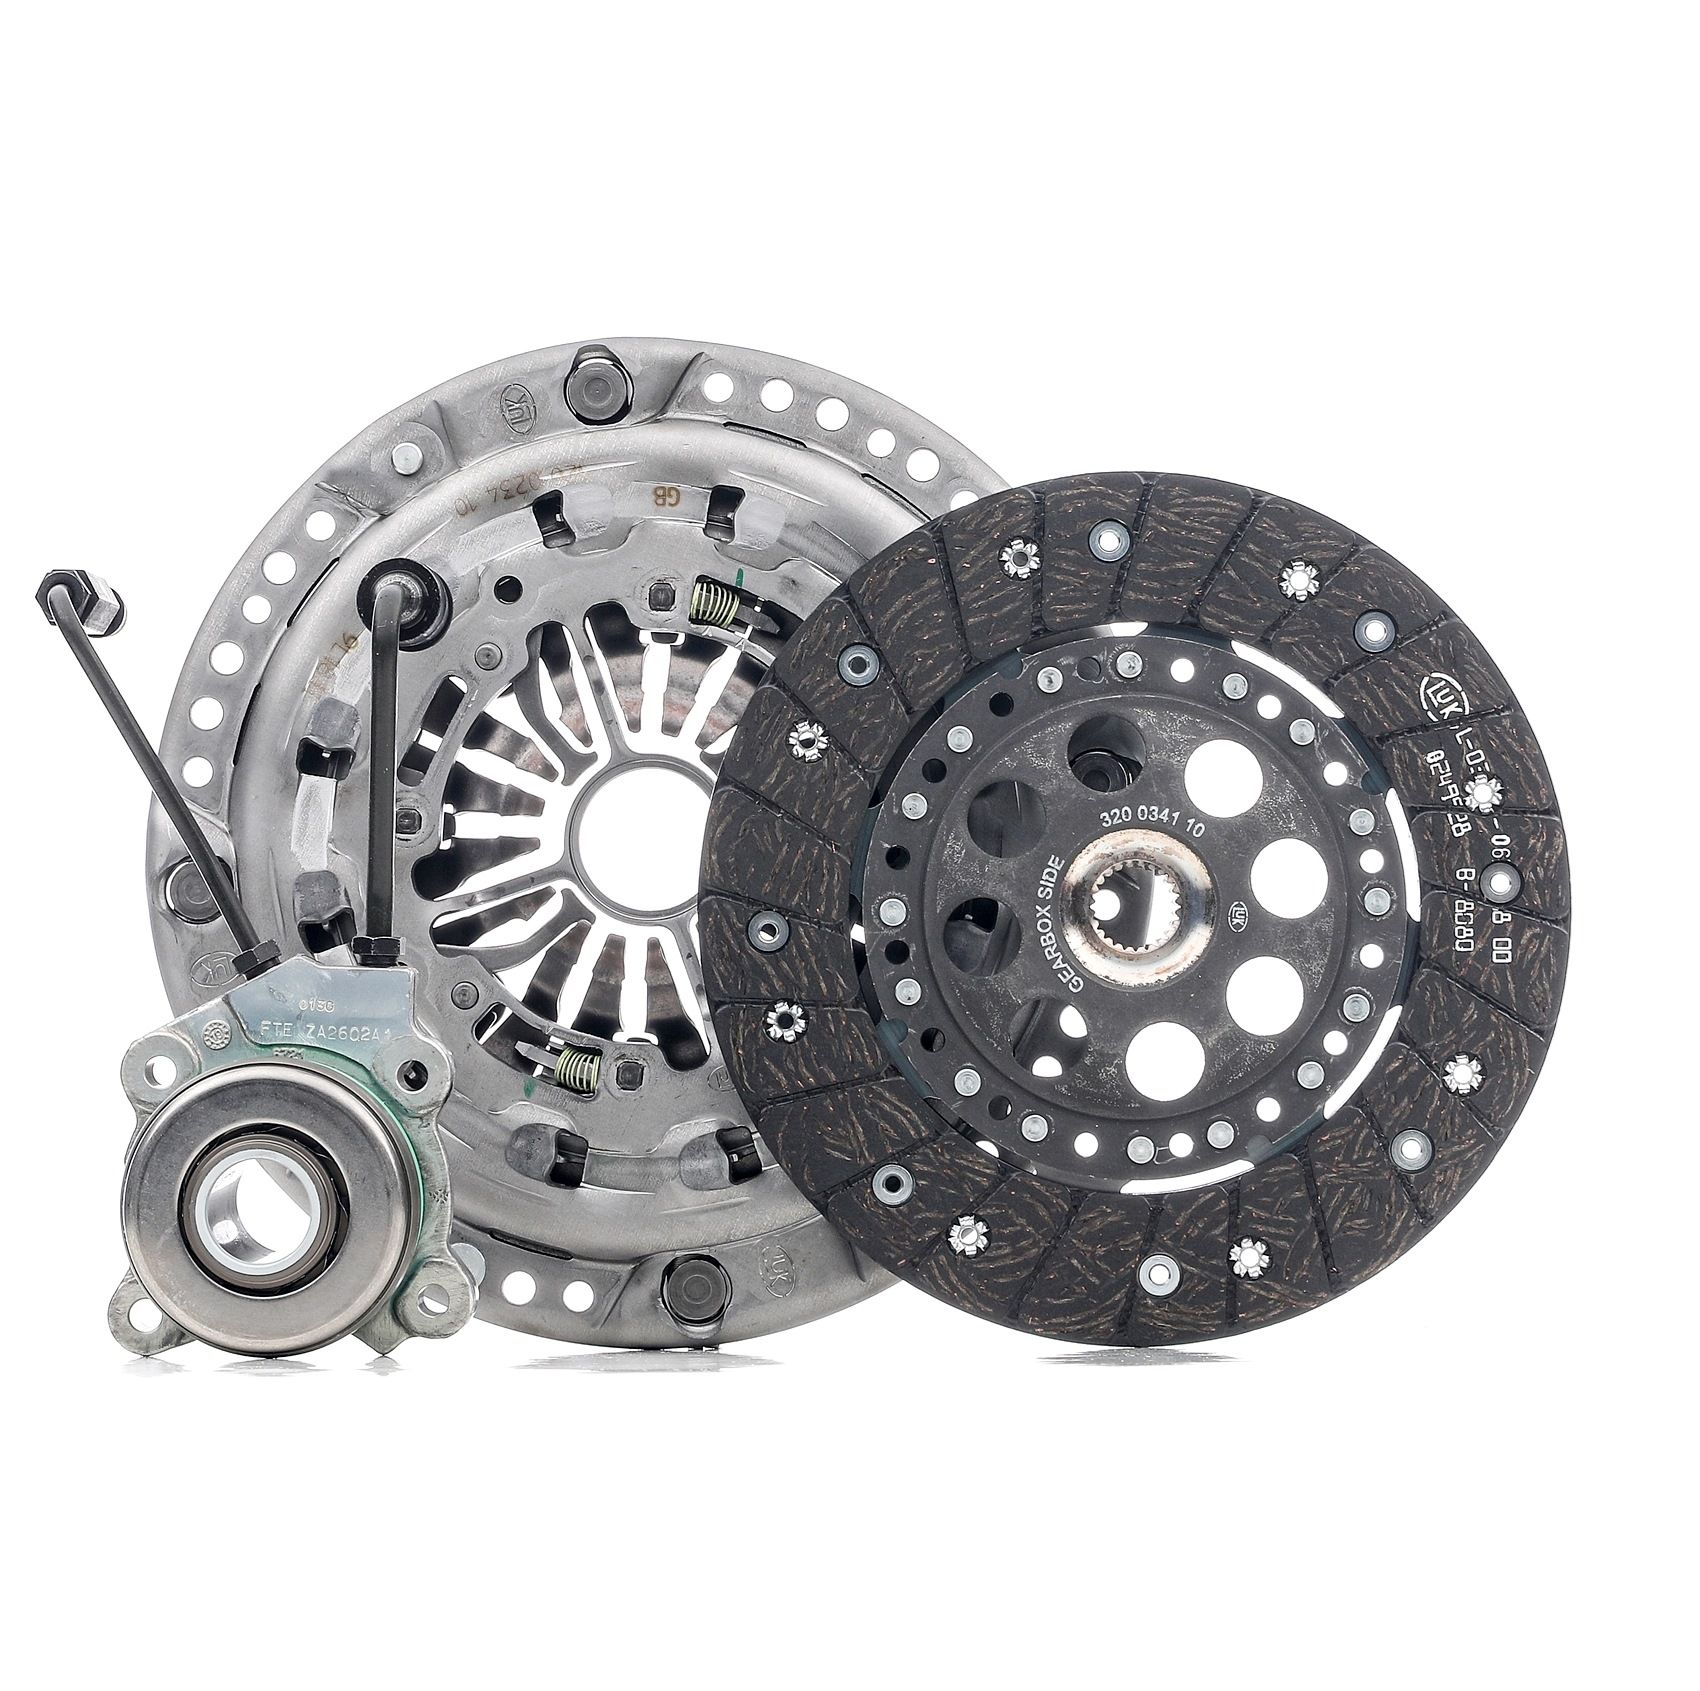 LuK 620 2520 33 Clutch kit for engines with dual-mass flywheel, with central slave cylinder, Requires special tools for mounting, Check and replace dual-mass flywheel if necessary., with automatic adjustment, 200mm